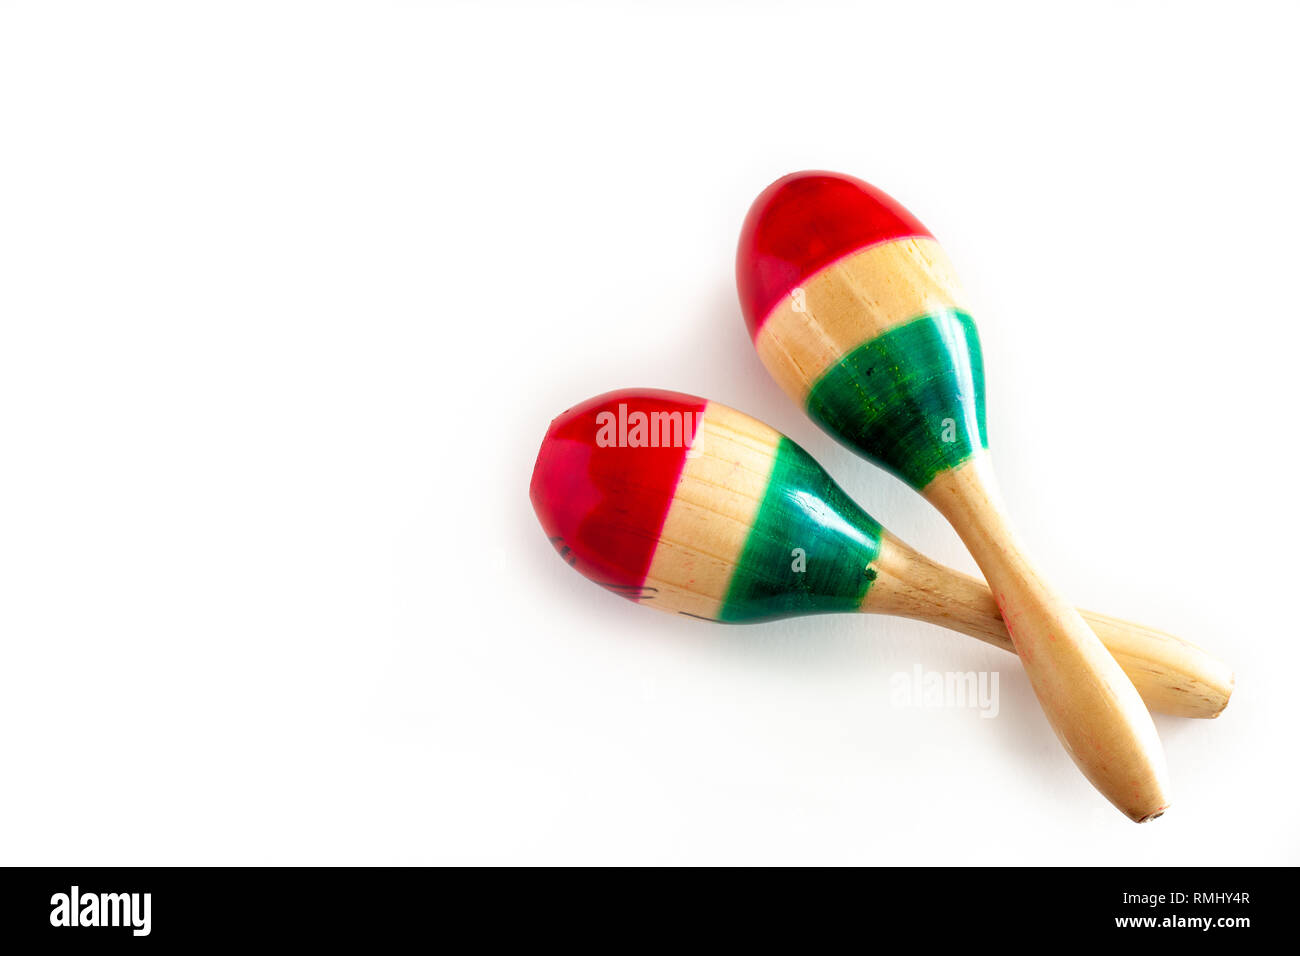 Two colorful maracas on white background. Cinco de mayo background. Stock Photo